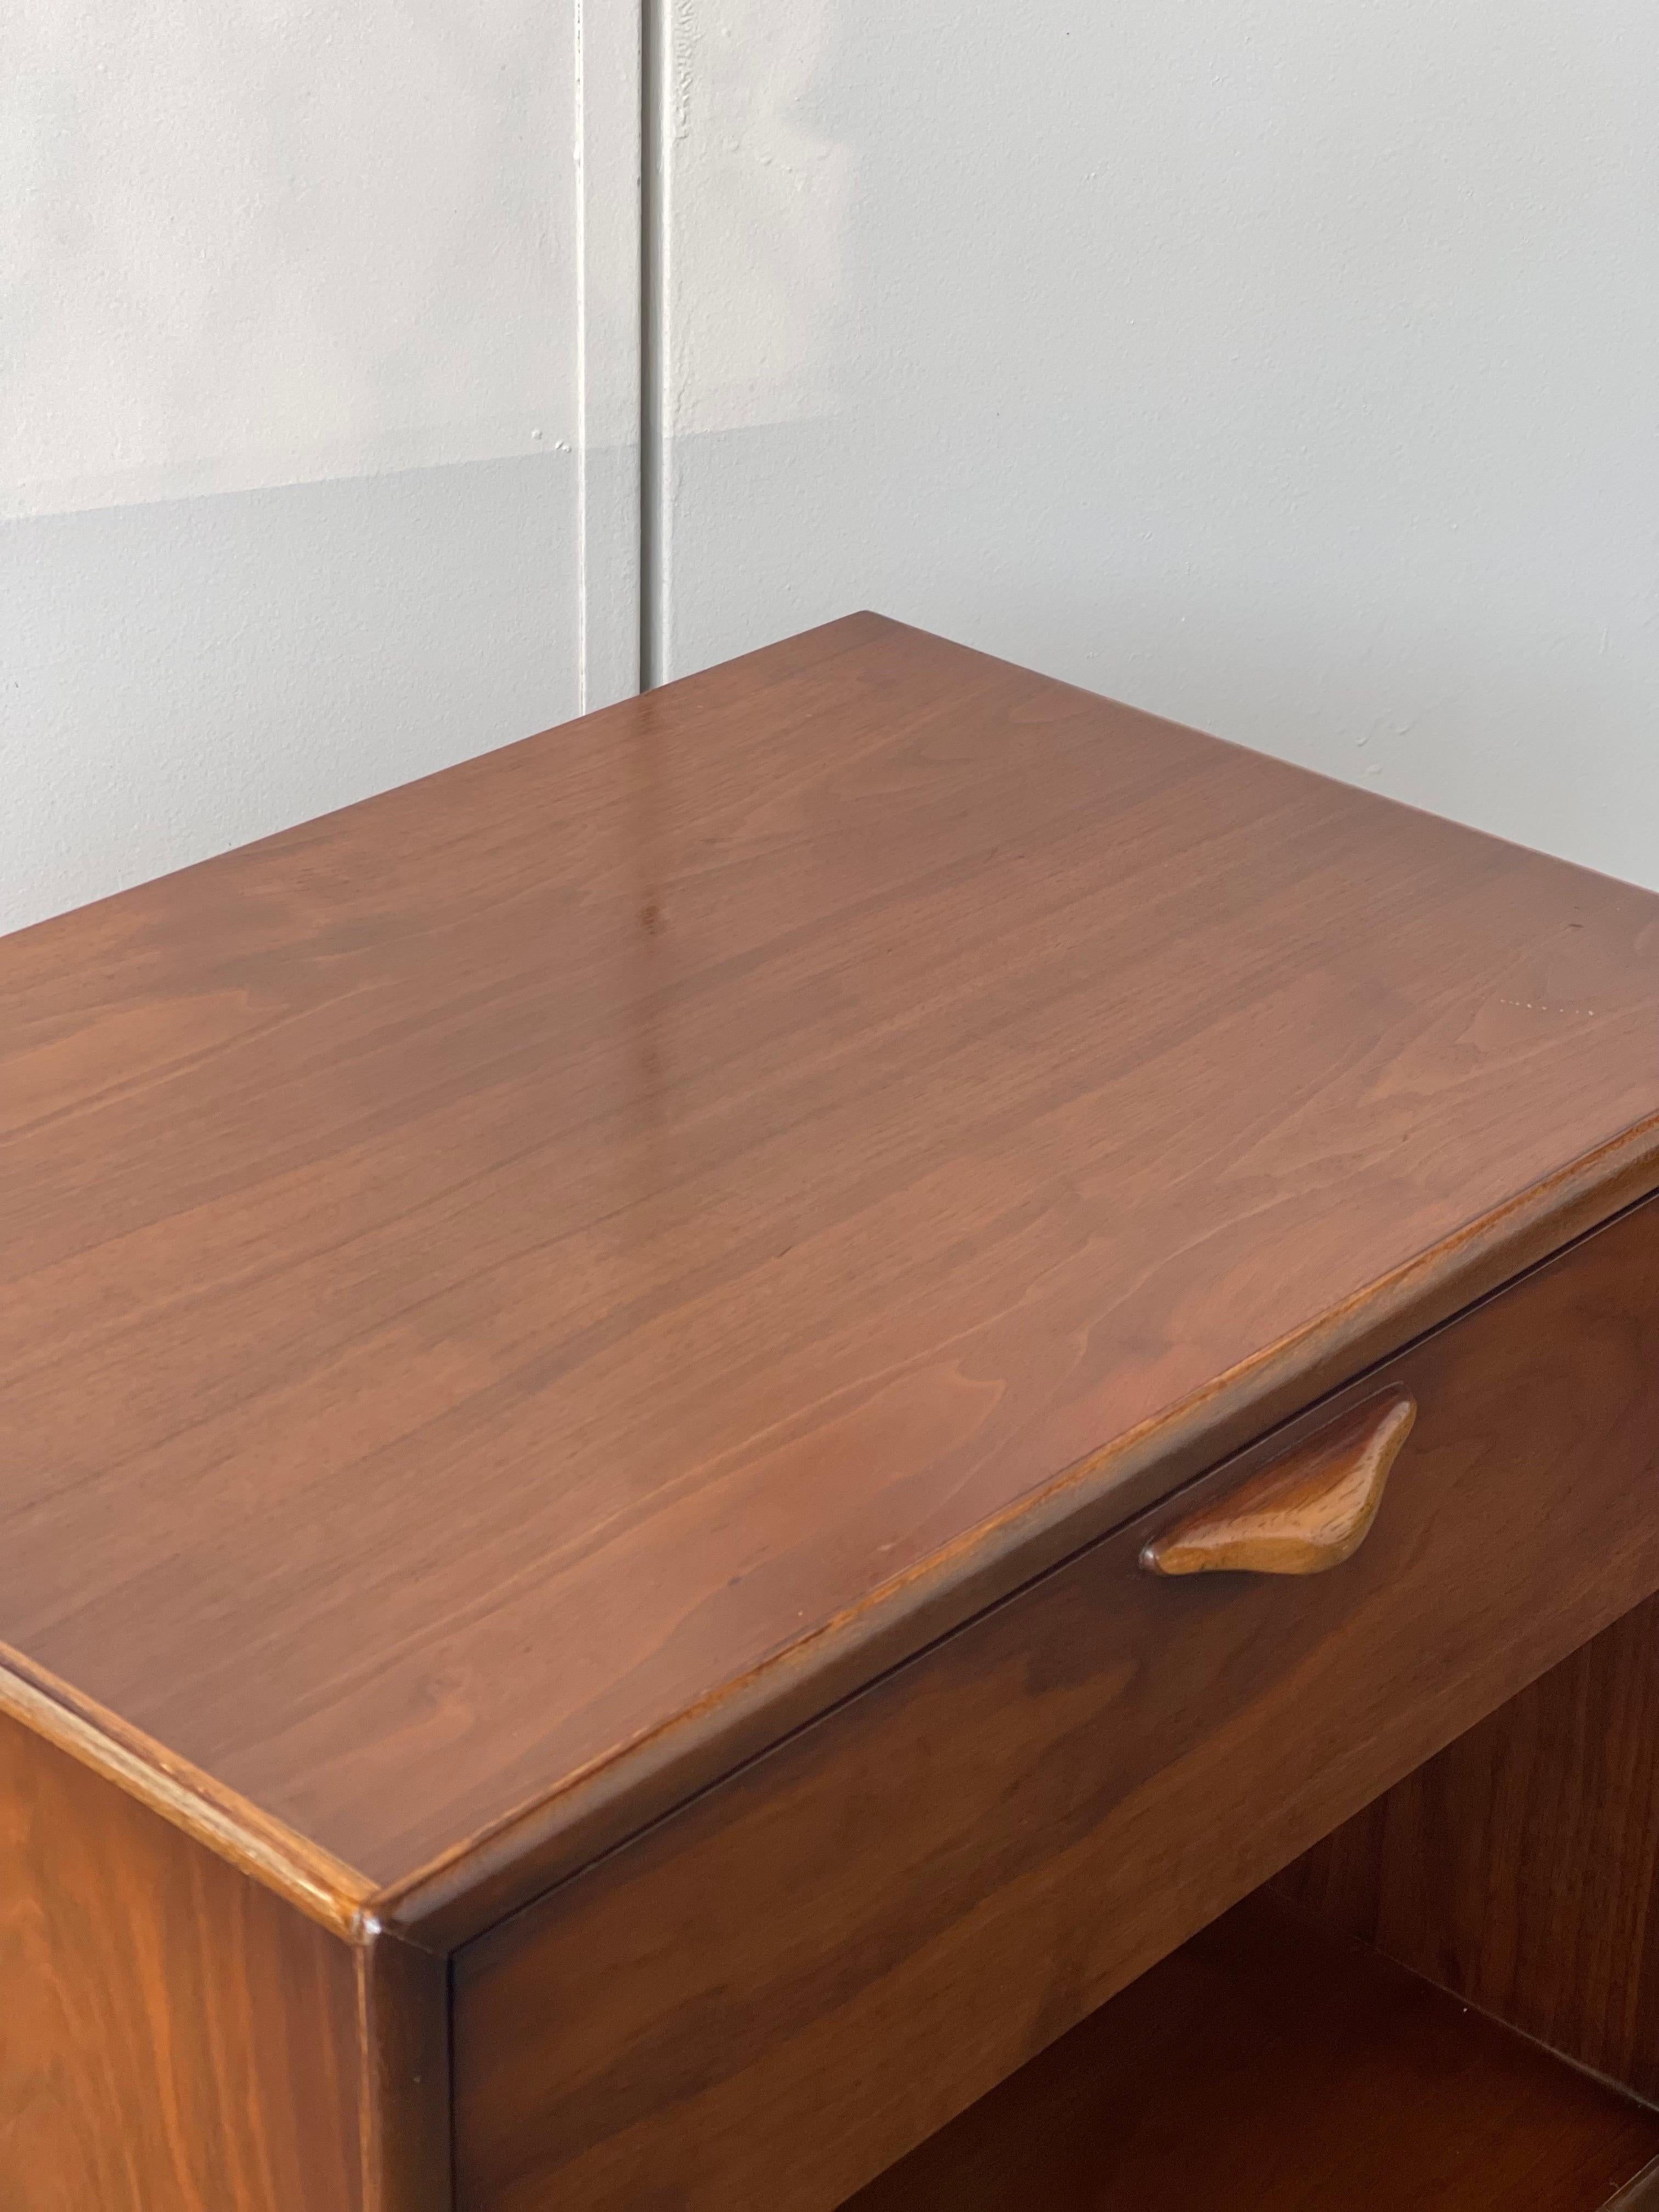 Vintage Mid-Century Modern Walnut End Table Set. Dovetail Drawers by Lane For Sale 2